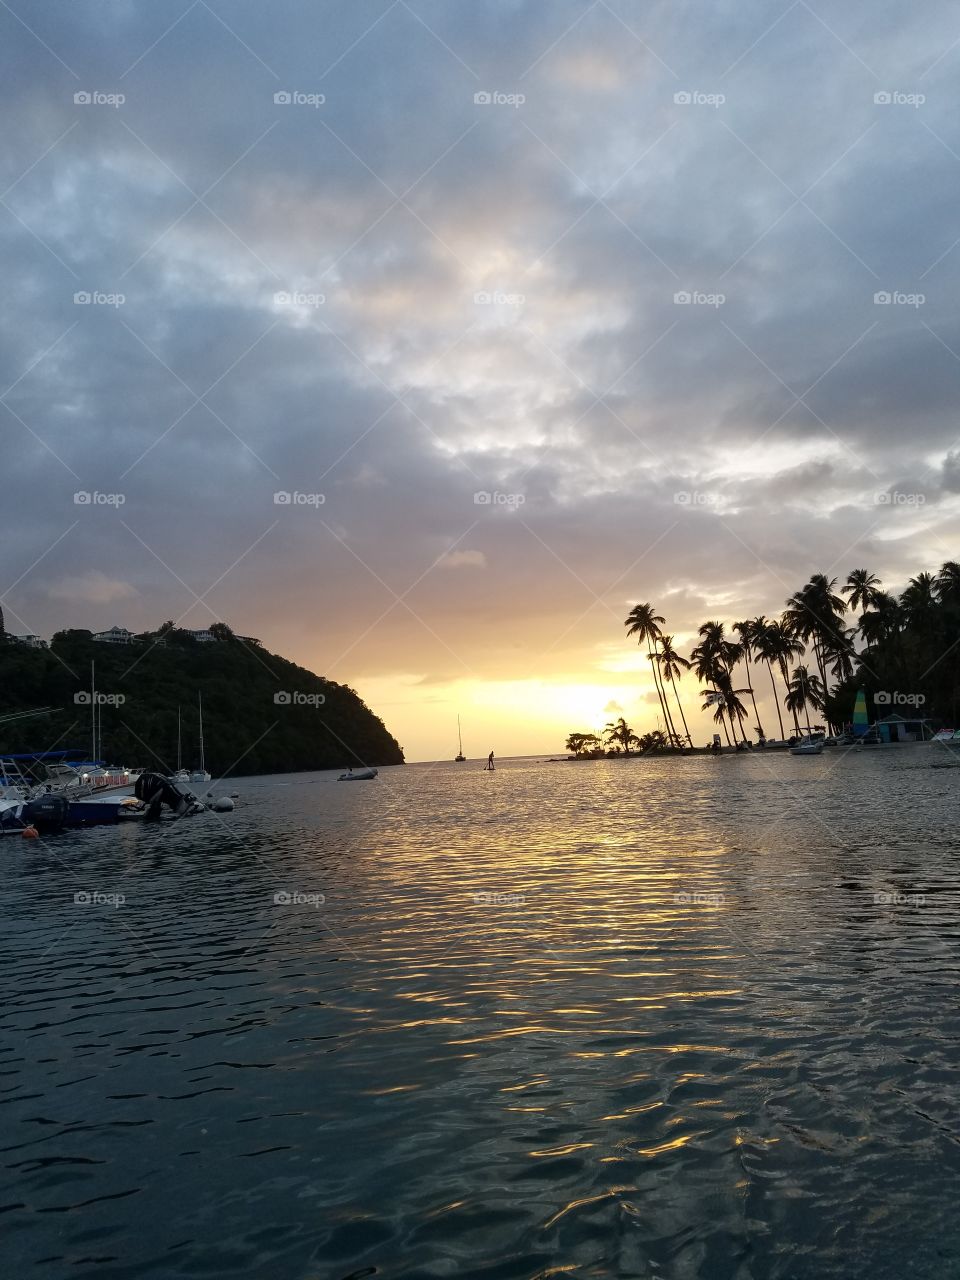 Marigot bay stunning sunset only in the Caribbean